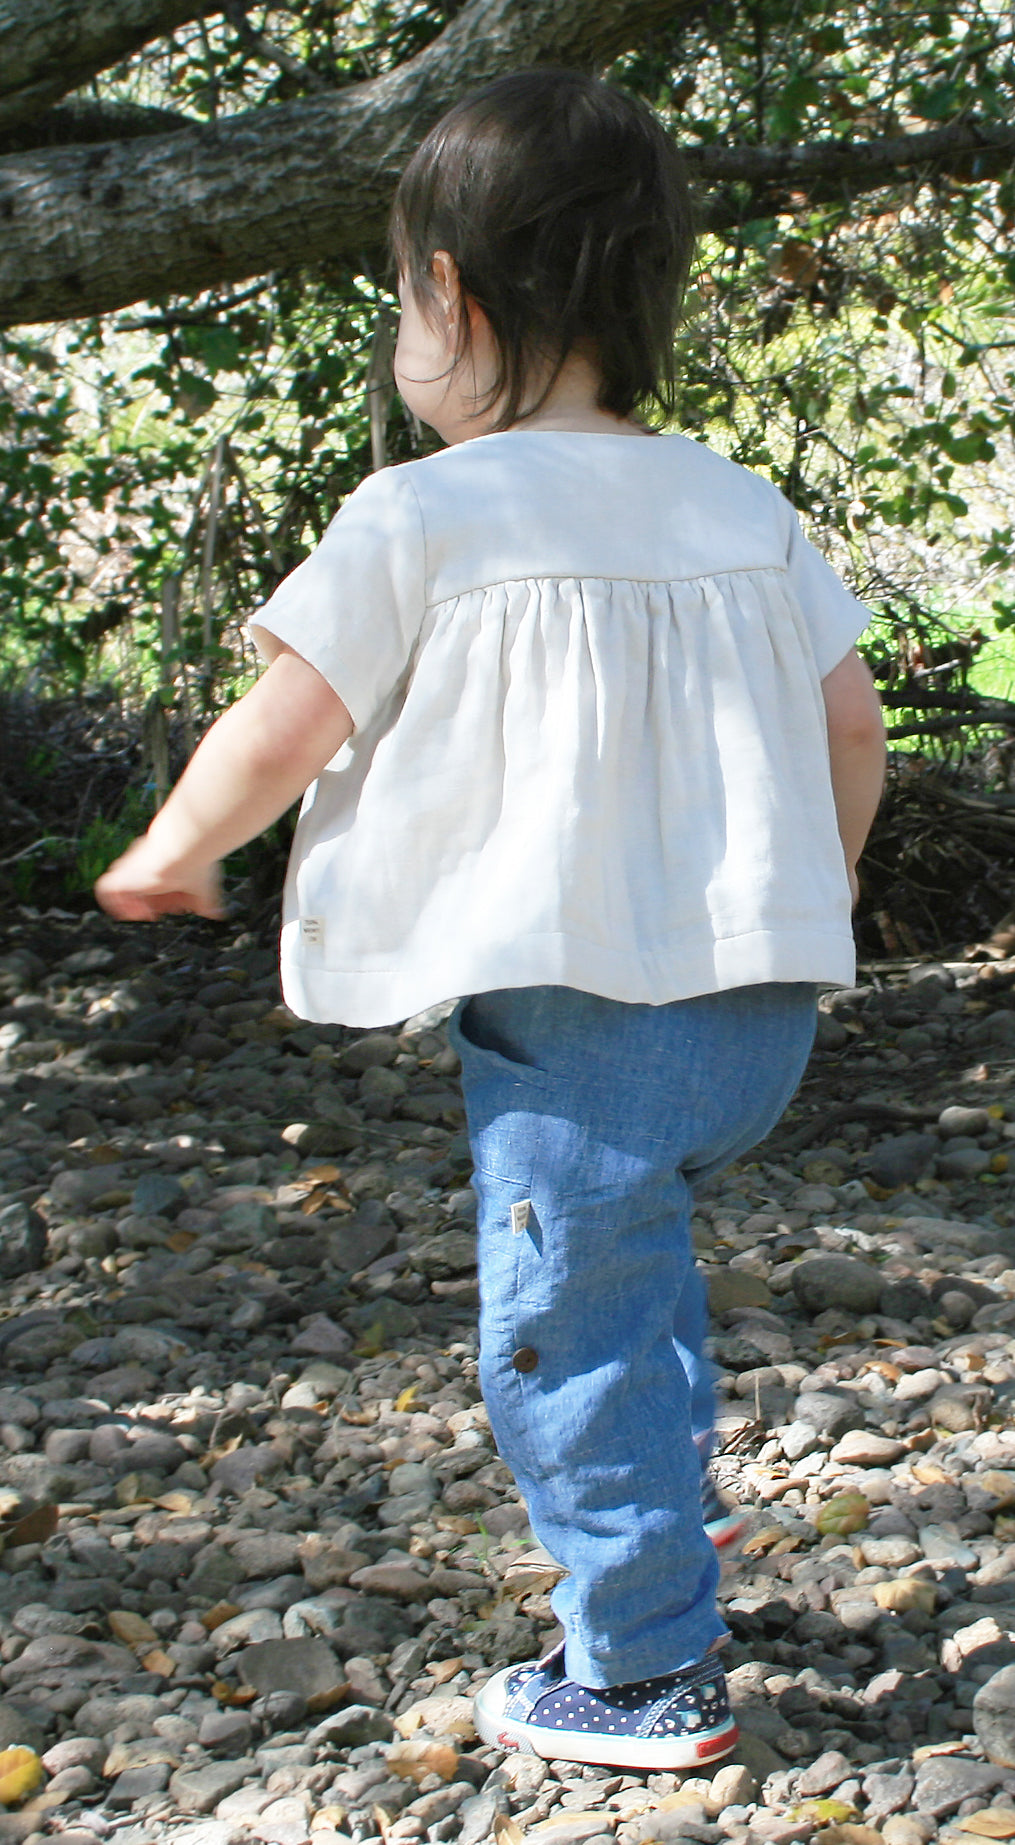 Our model is wearing size 18-24m and is 20 months, 23 lbs and 33" tall.